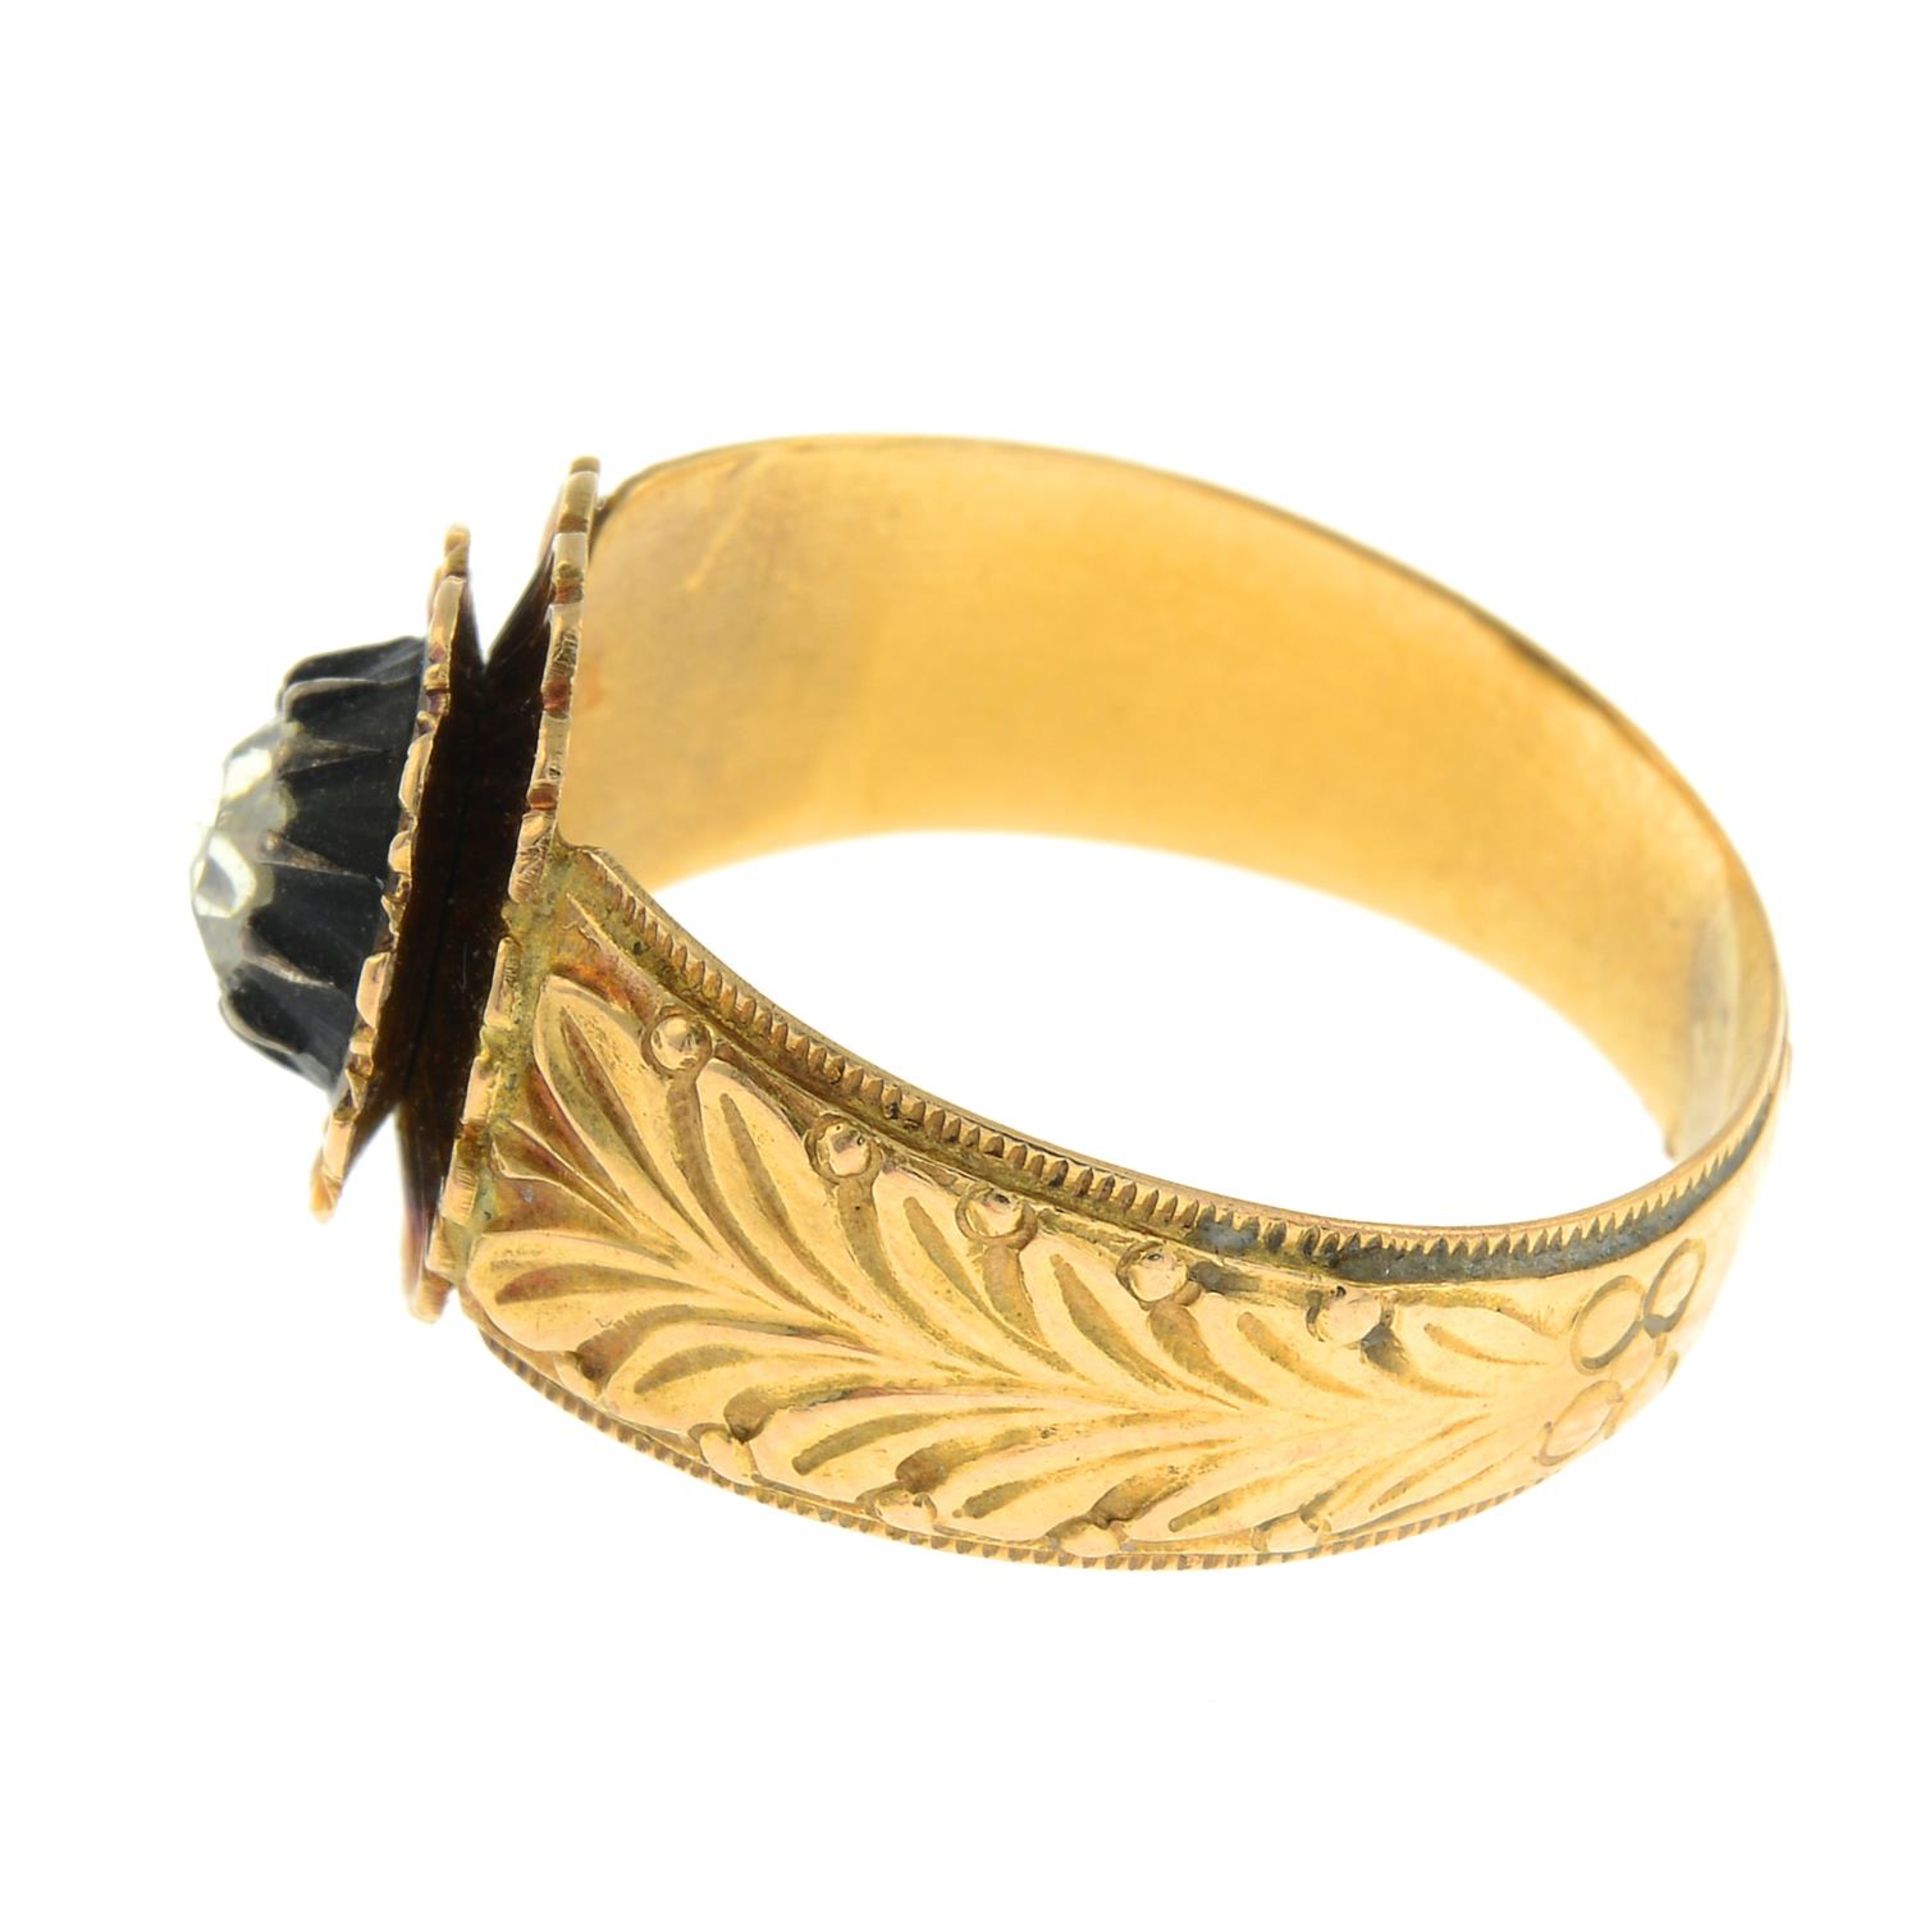 A 19th century 18ct gold rose-cut diamond floral ring, with foliate tapered band. - Image 3 of 5